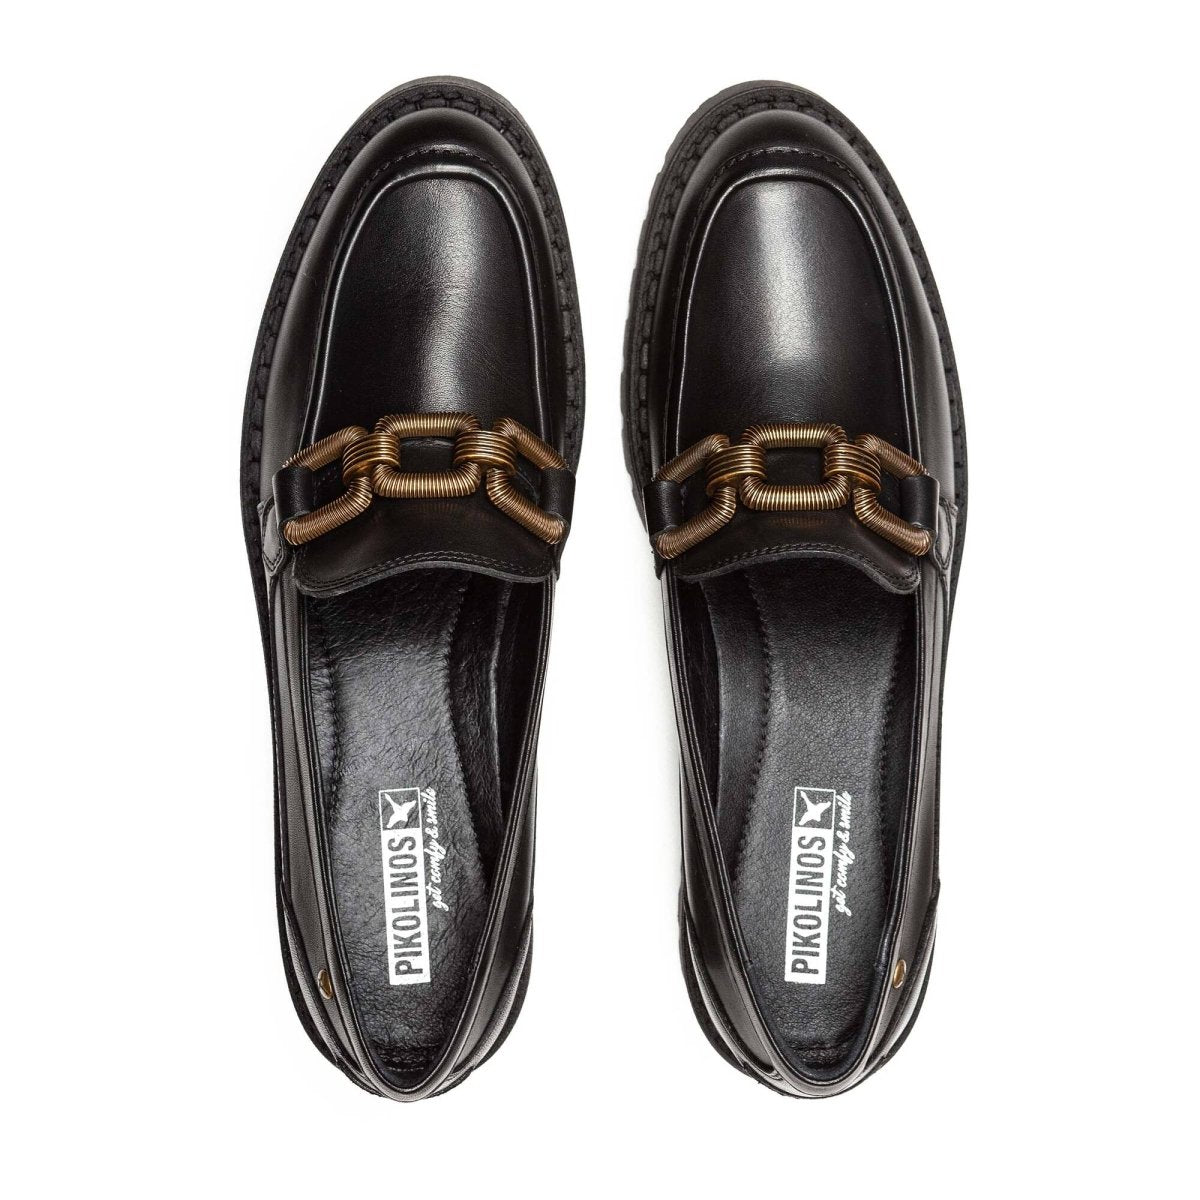 PIKOLINOS AVILES W6P-3742 WOMEN'S LOAFERS IN BLACK - TLW Shoes